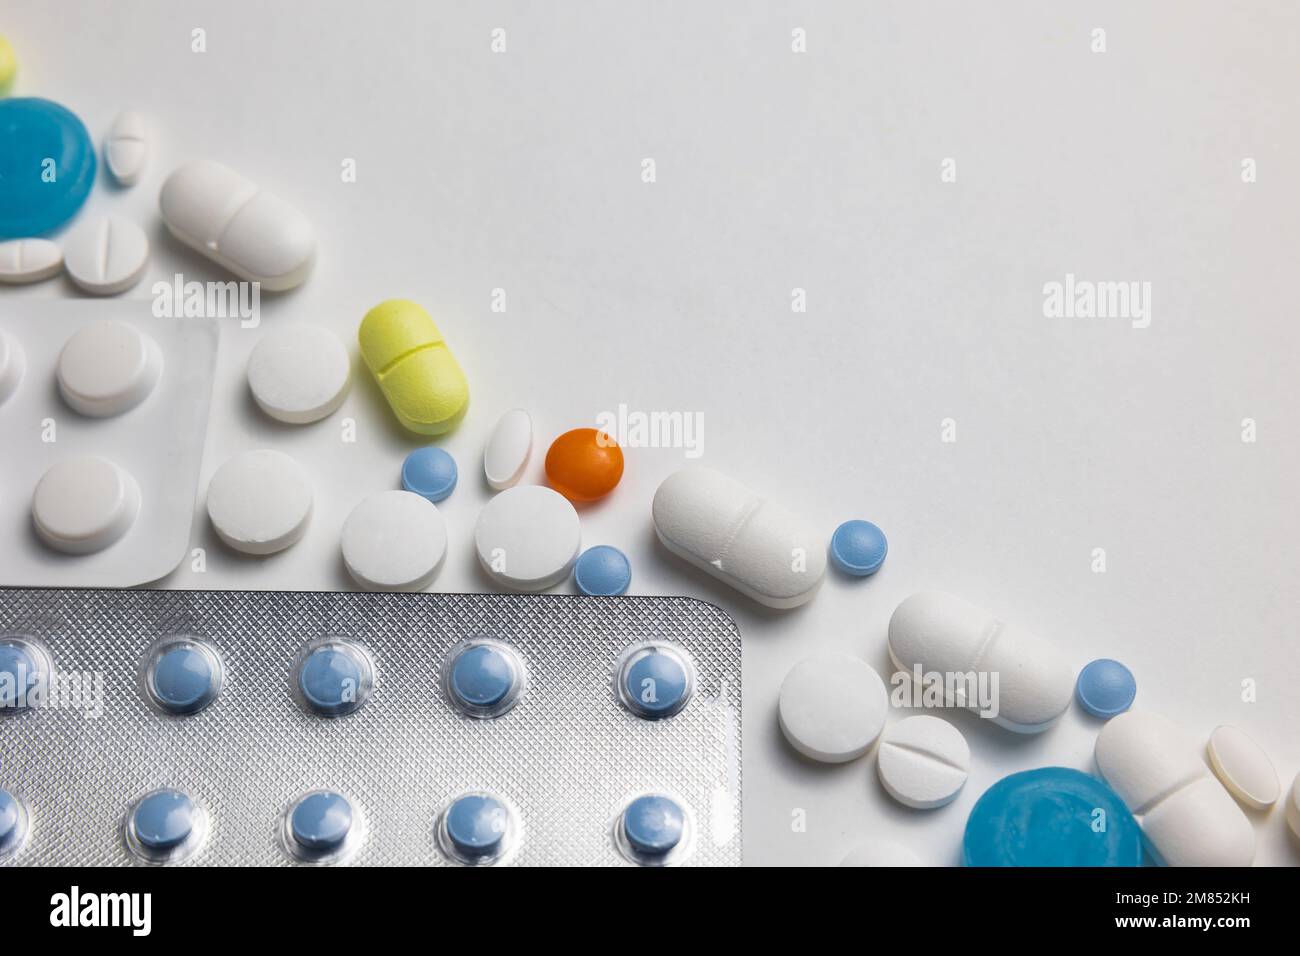 Medicine or healthcare concept photo. Various pills or tablets on white background with copy space for texts. Stock Photo